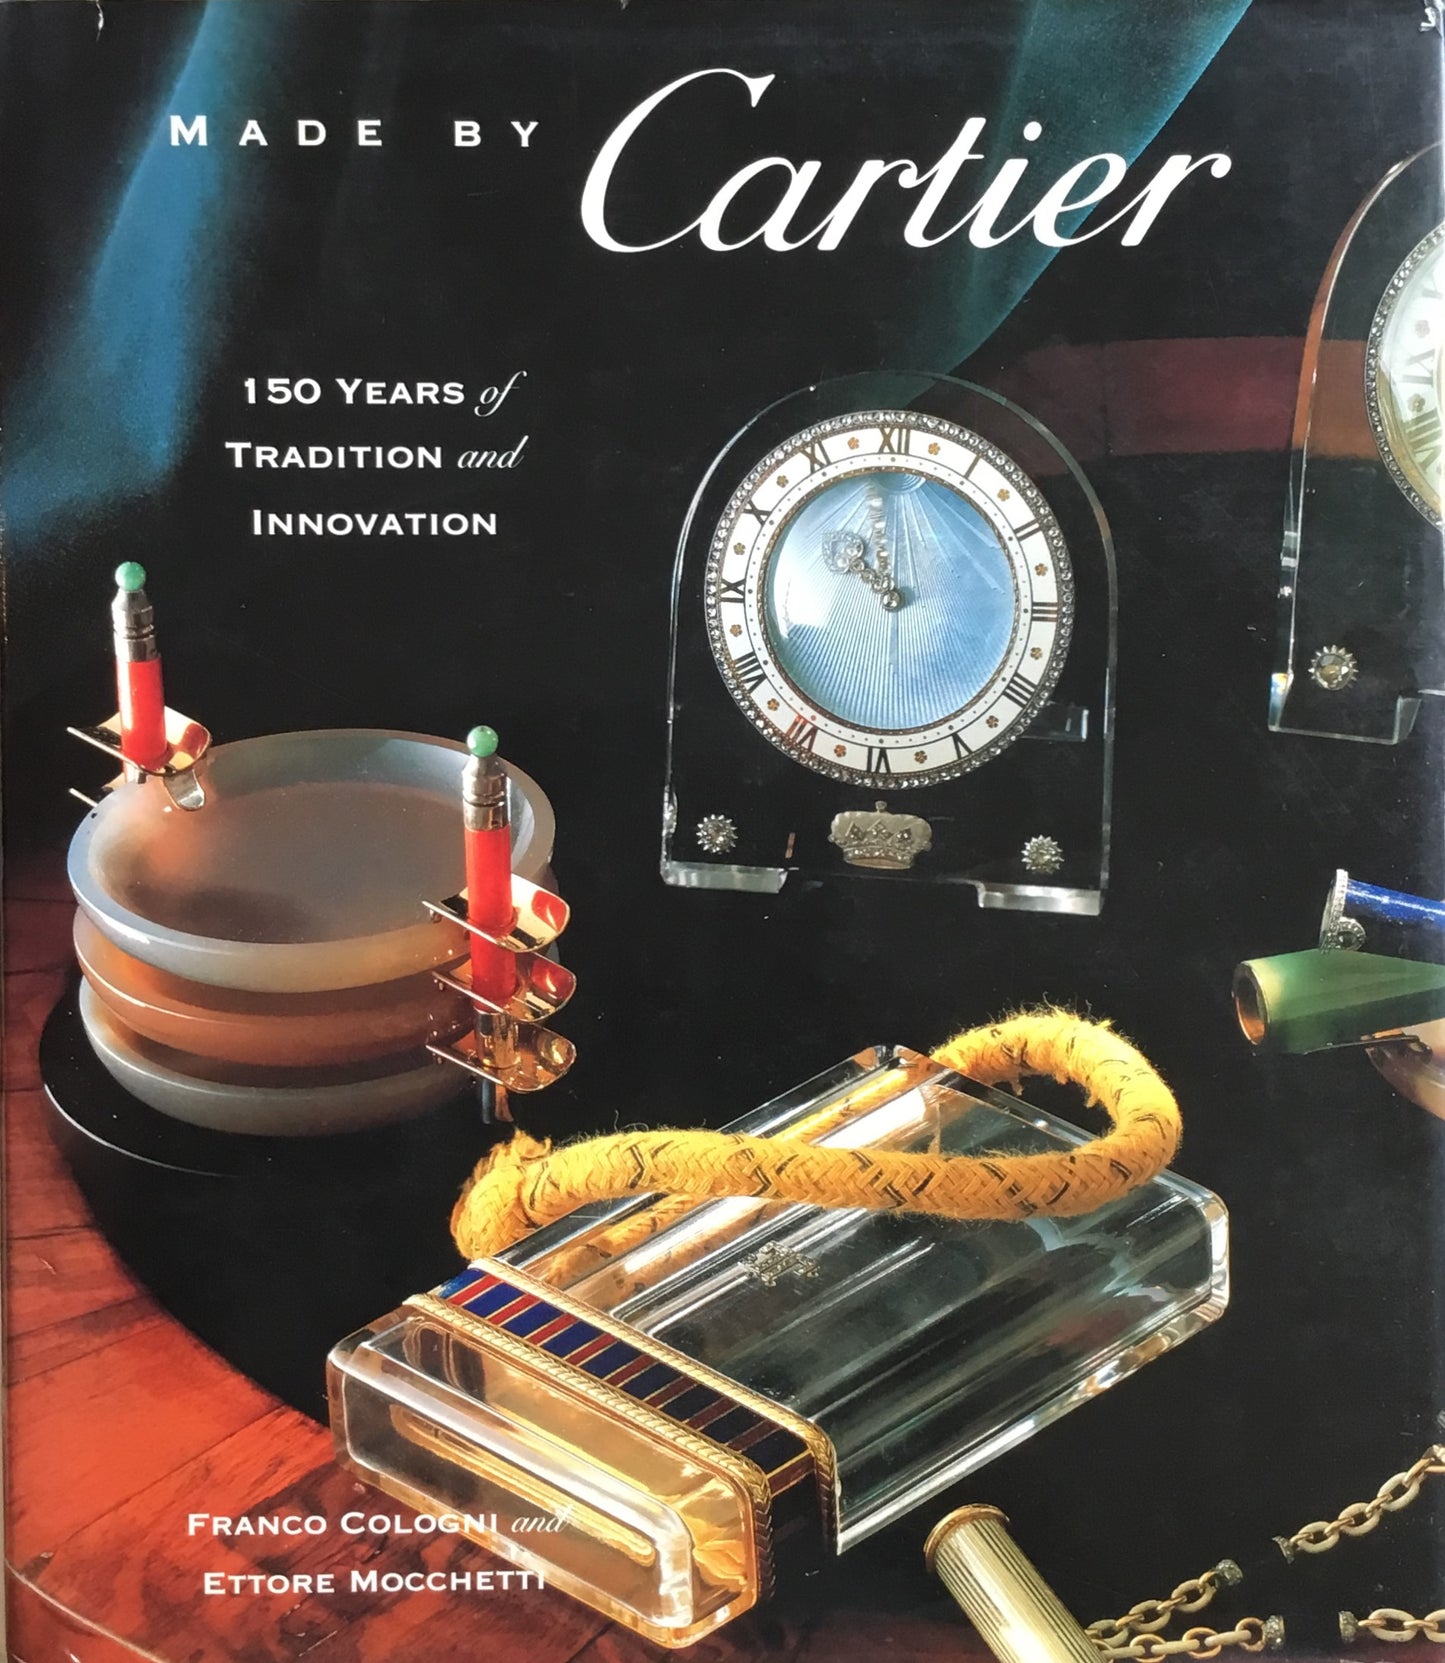 MADE BY Cartier 150 years of tradition and innovation